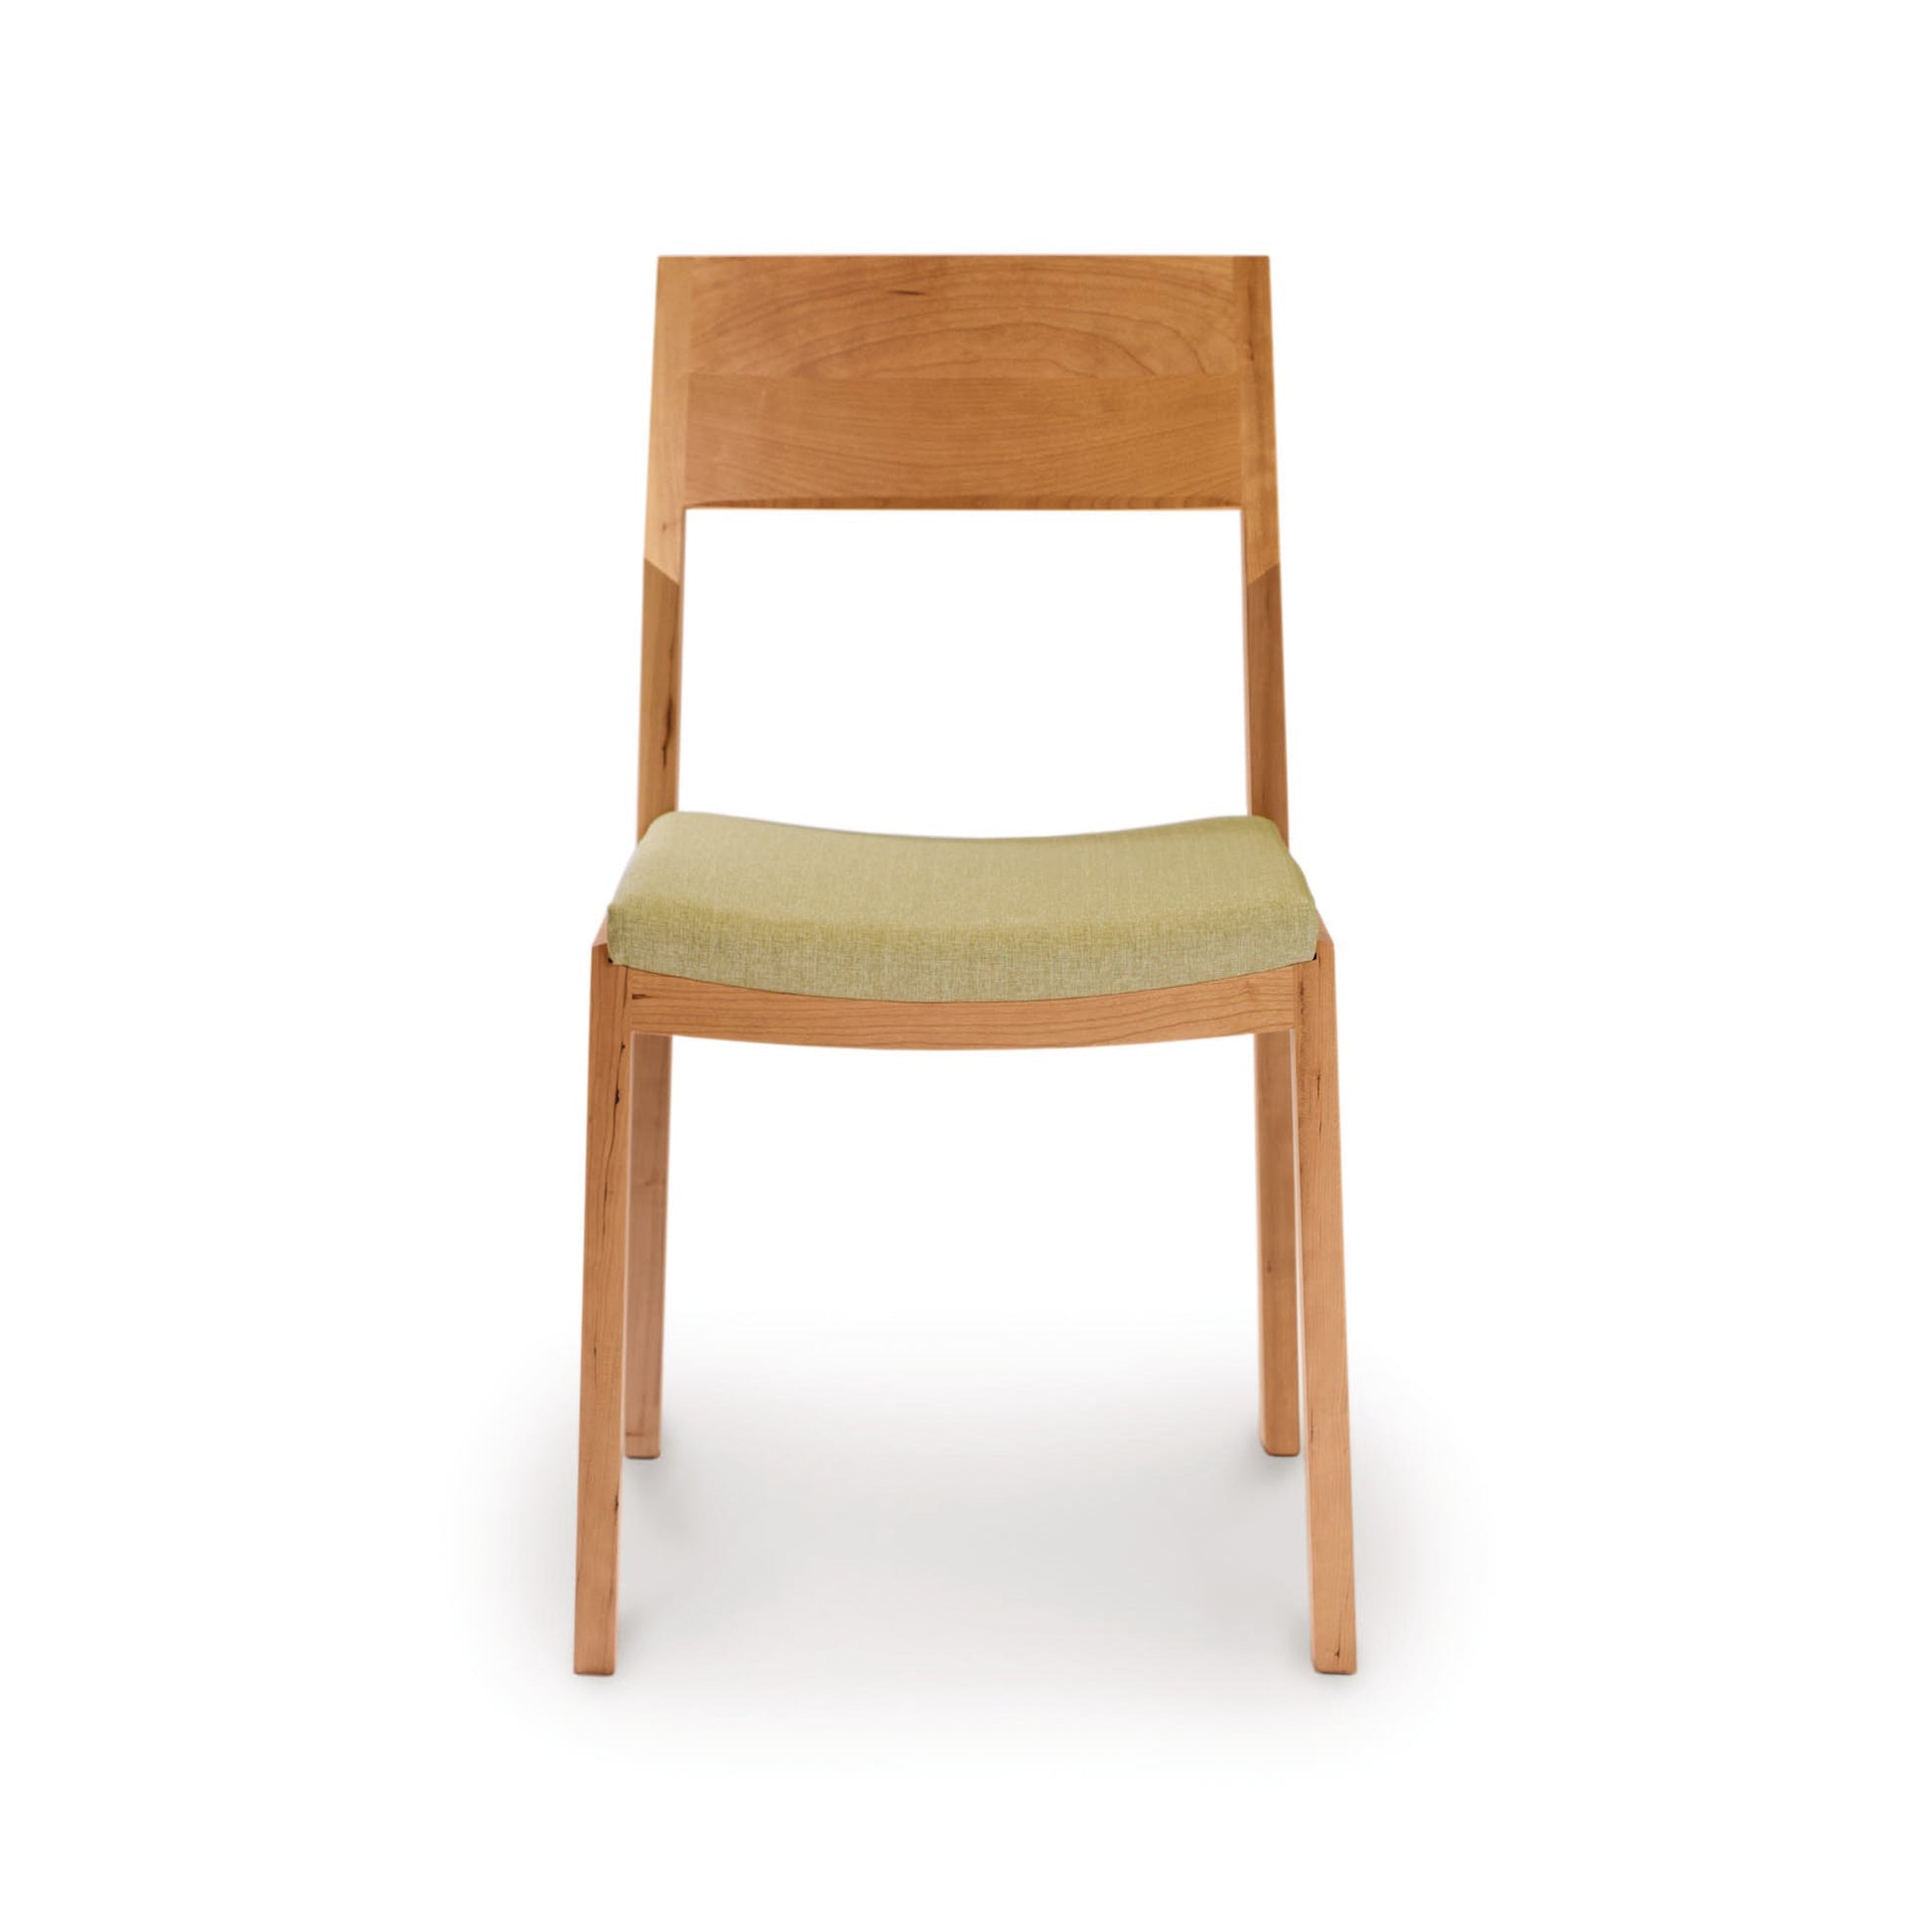 A solid cherry wood Copeland Furniture Iso Chair with a green fabric seat against a white background, crafted from sustainably sourced hardwoods.